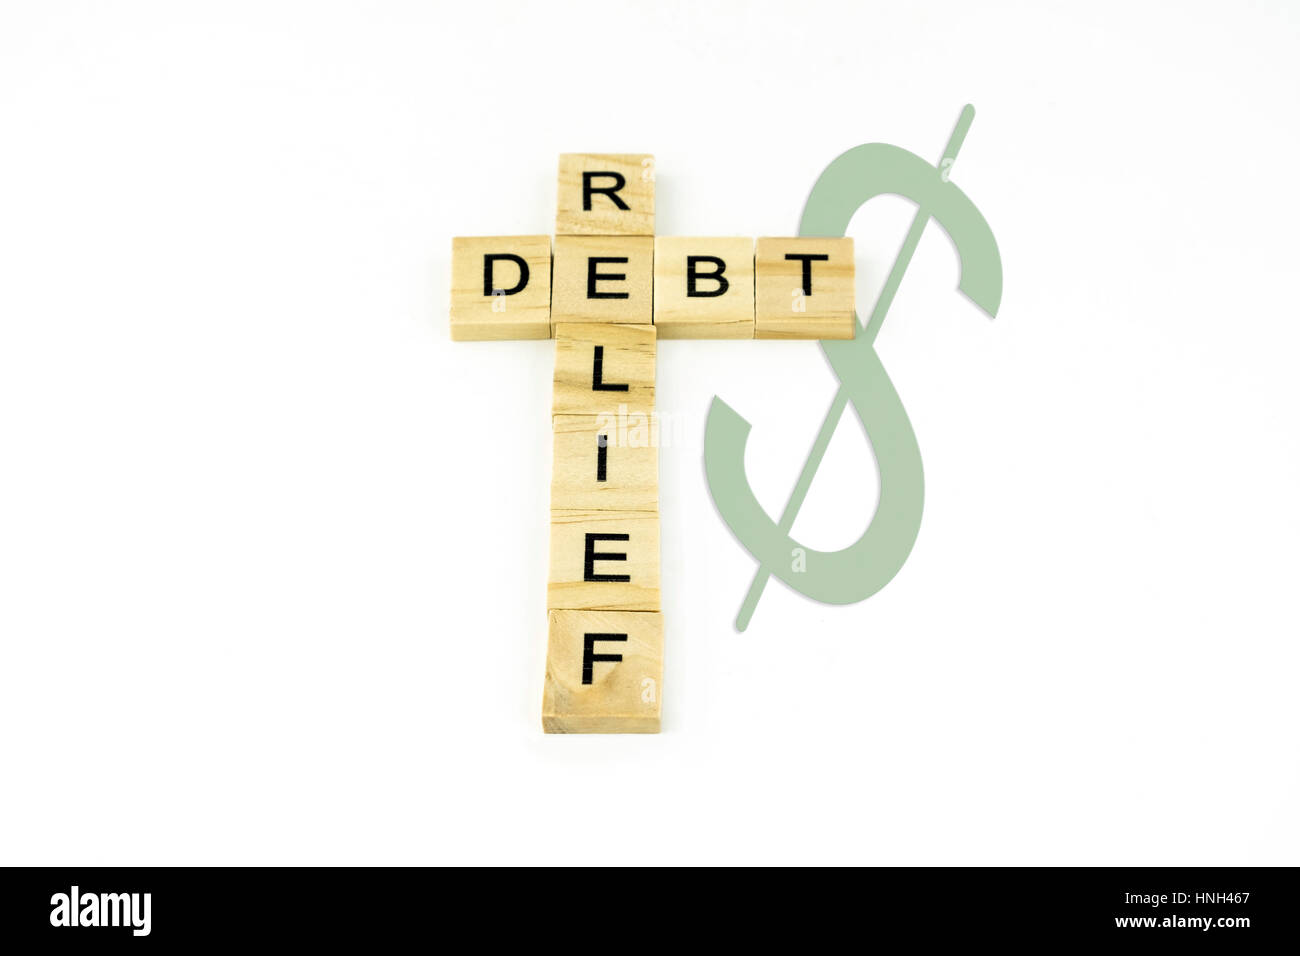 Concept debt reflief spelled out in wood blocks. Stock Photo